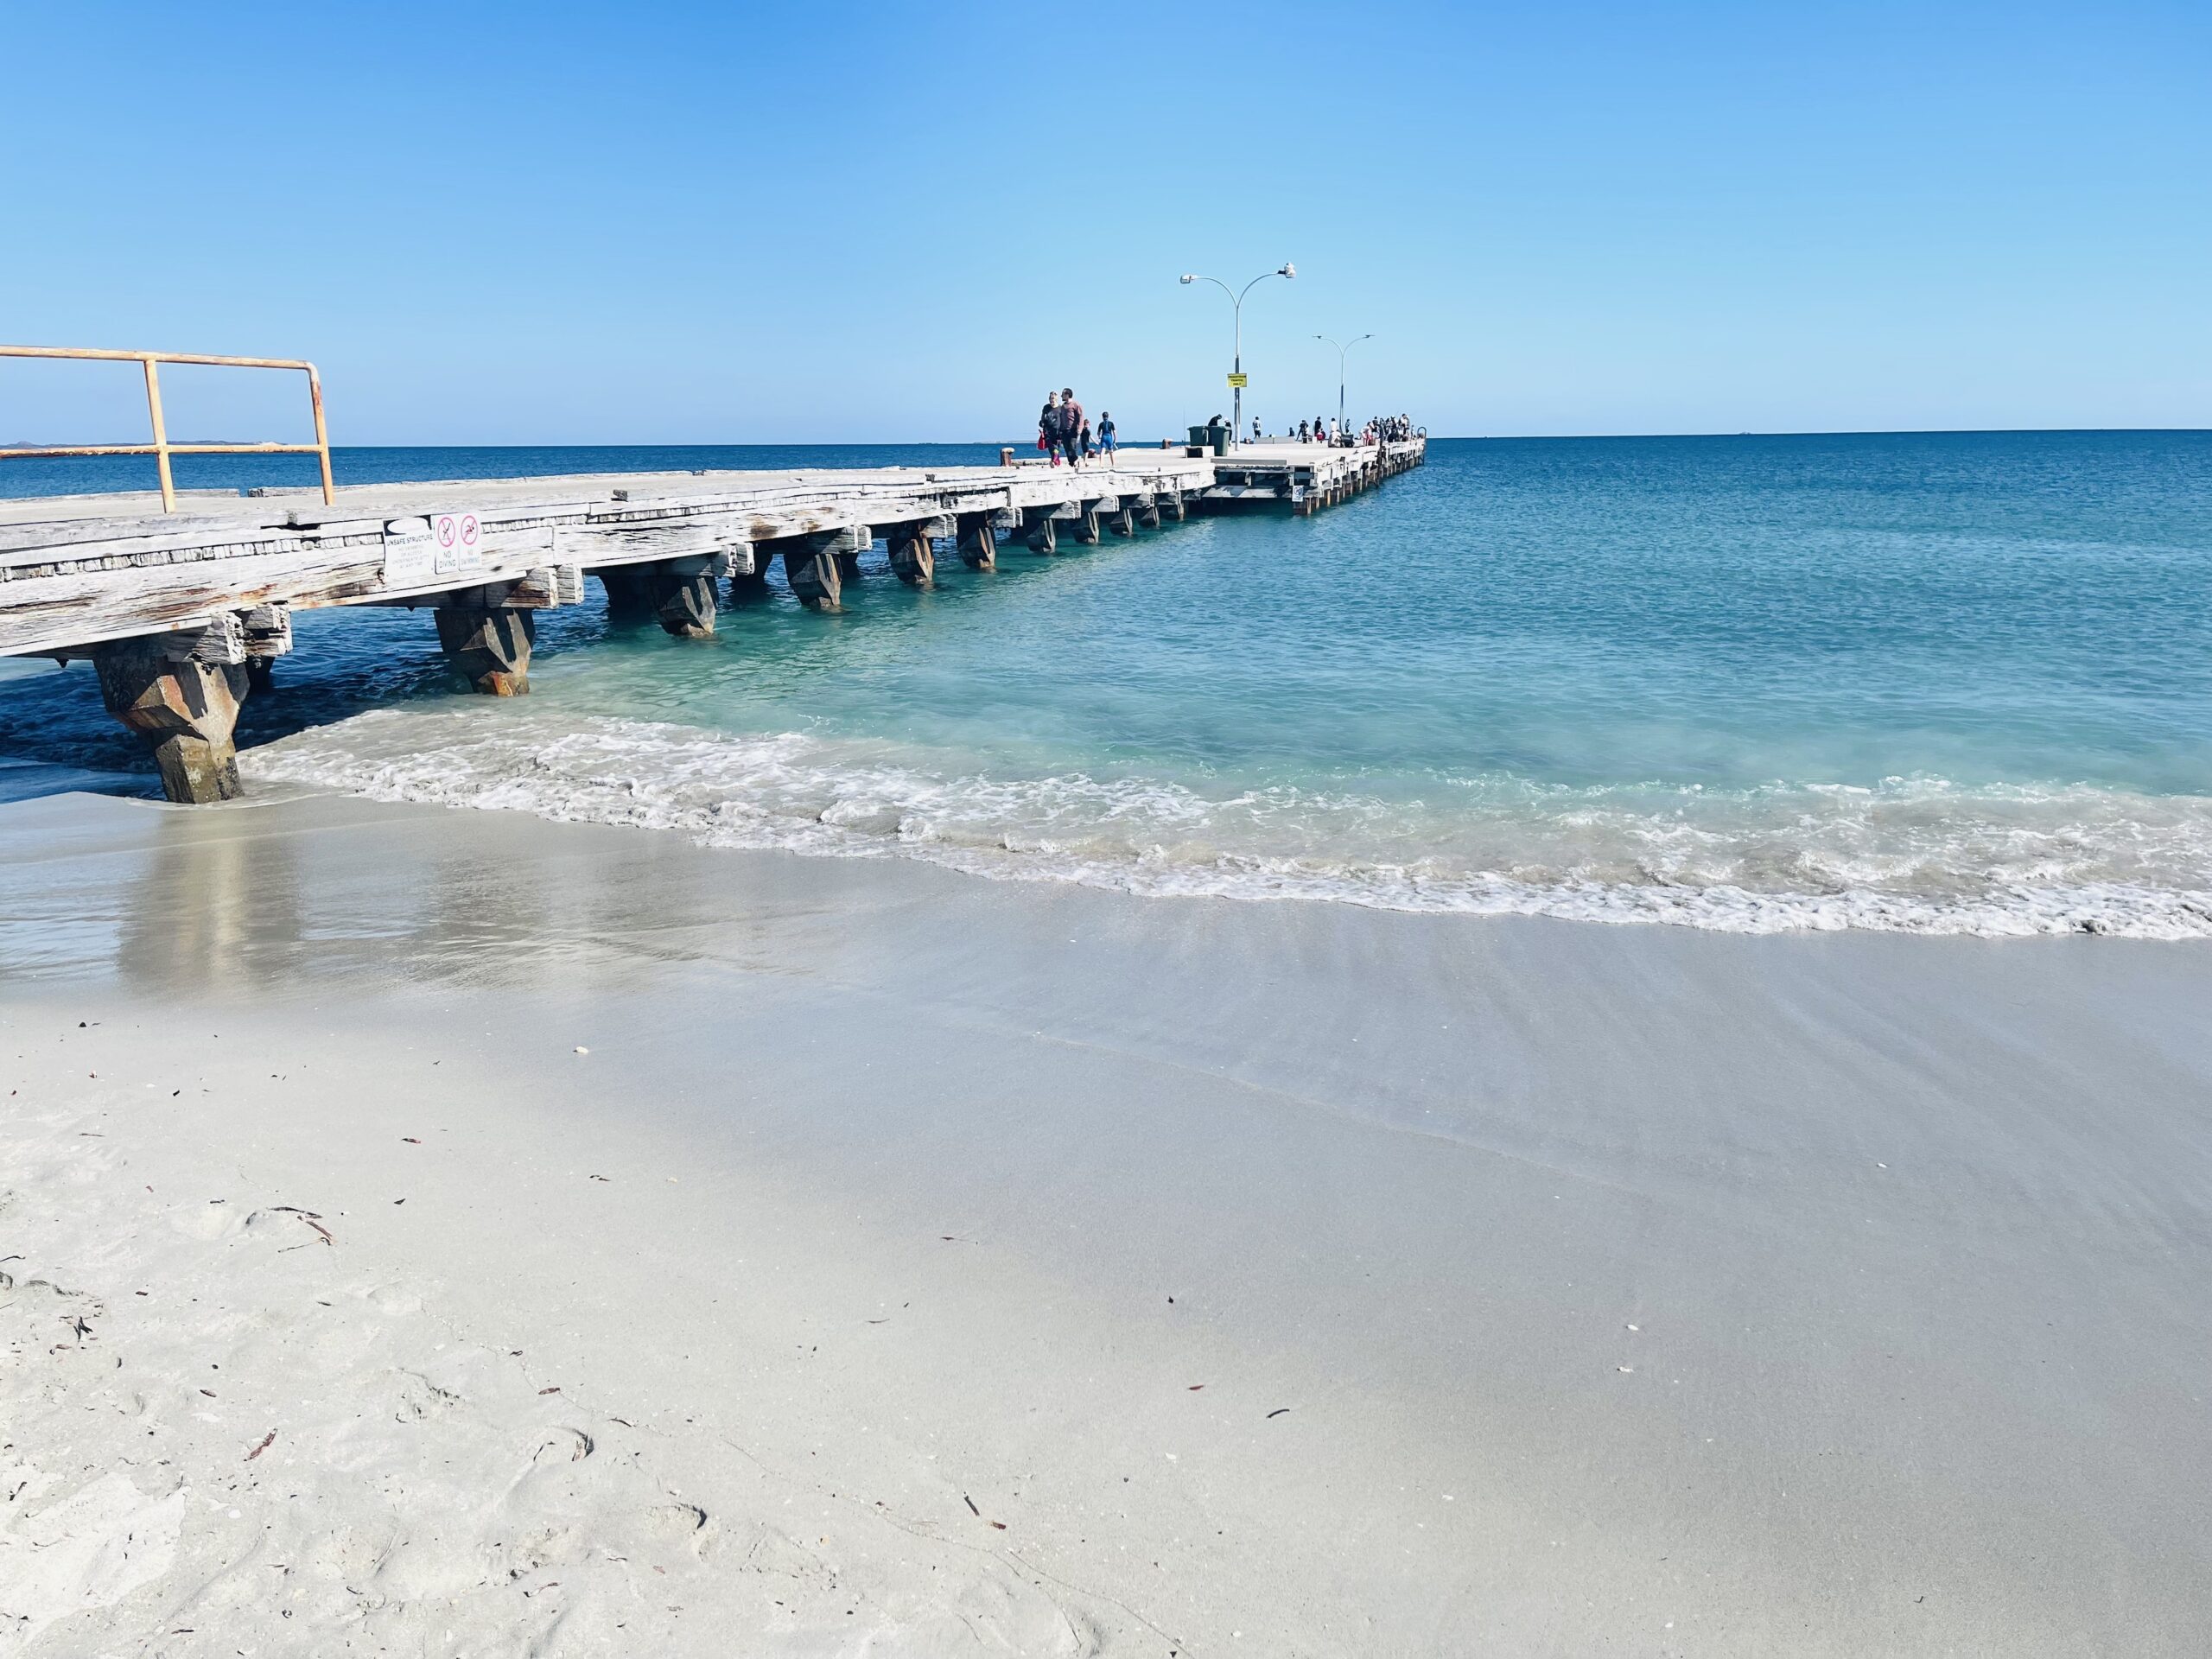 This photograph was taken on the shore of Woodman Point Beach overlooking Ammo Jetty. Ammo Jetty is an old wooden bridge, which has faded to a light brown colour over many years of use. There are people on the bridge in the distance. It is a bright and sunny day with no clouds, white sand and clear light blue water.